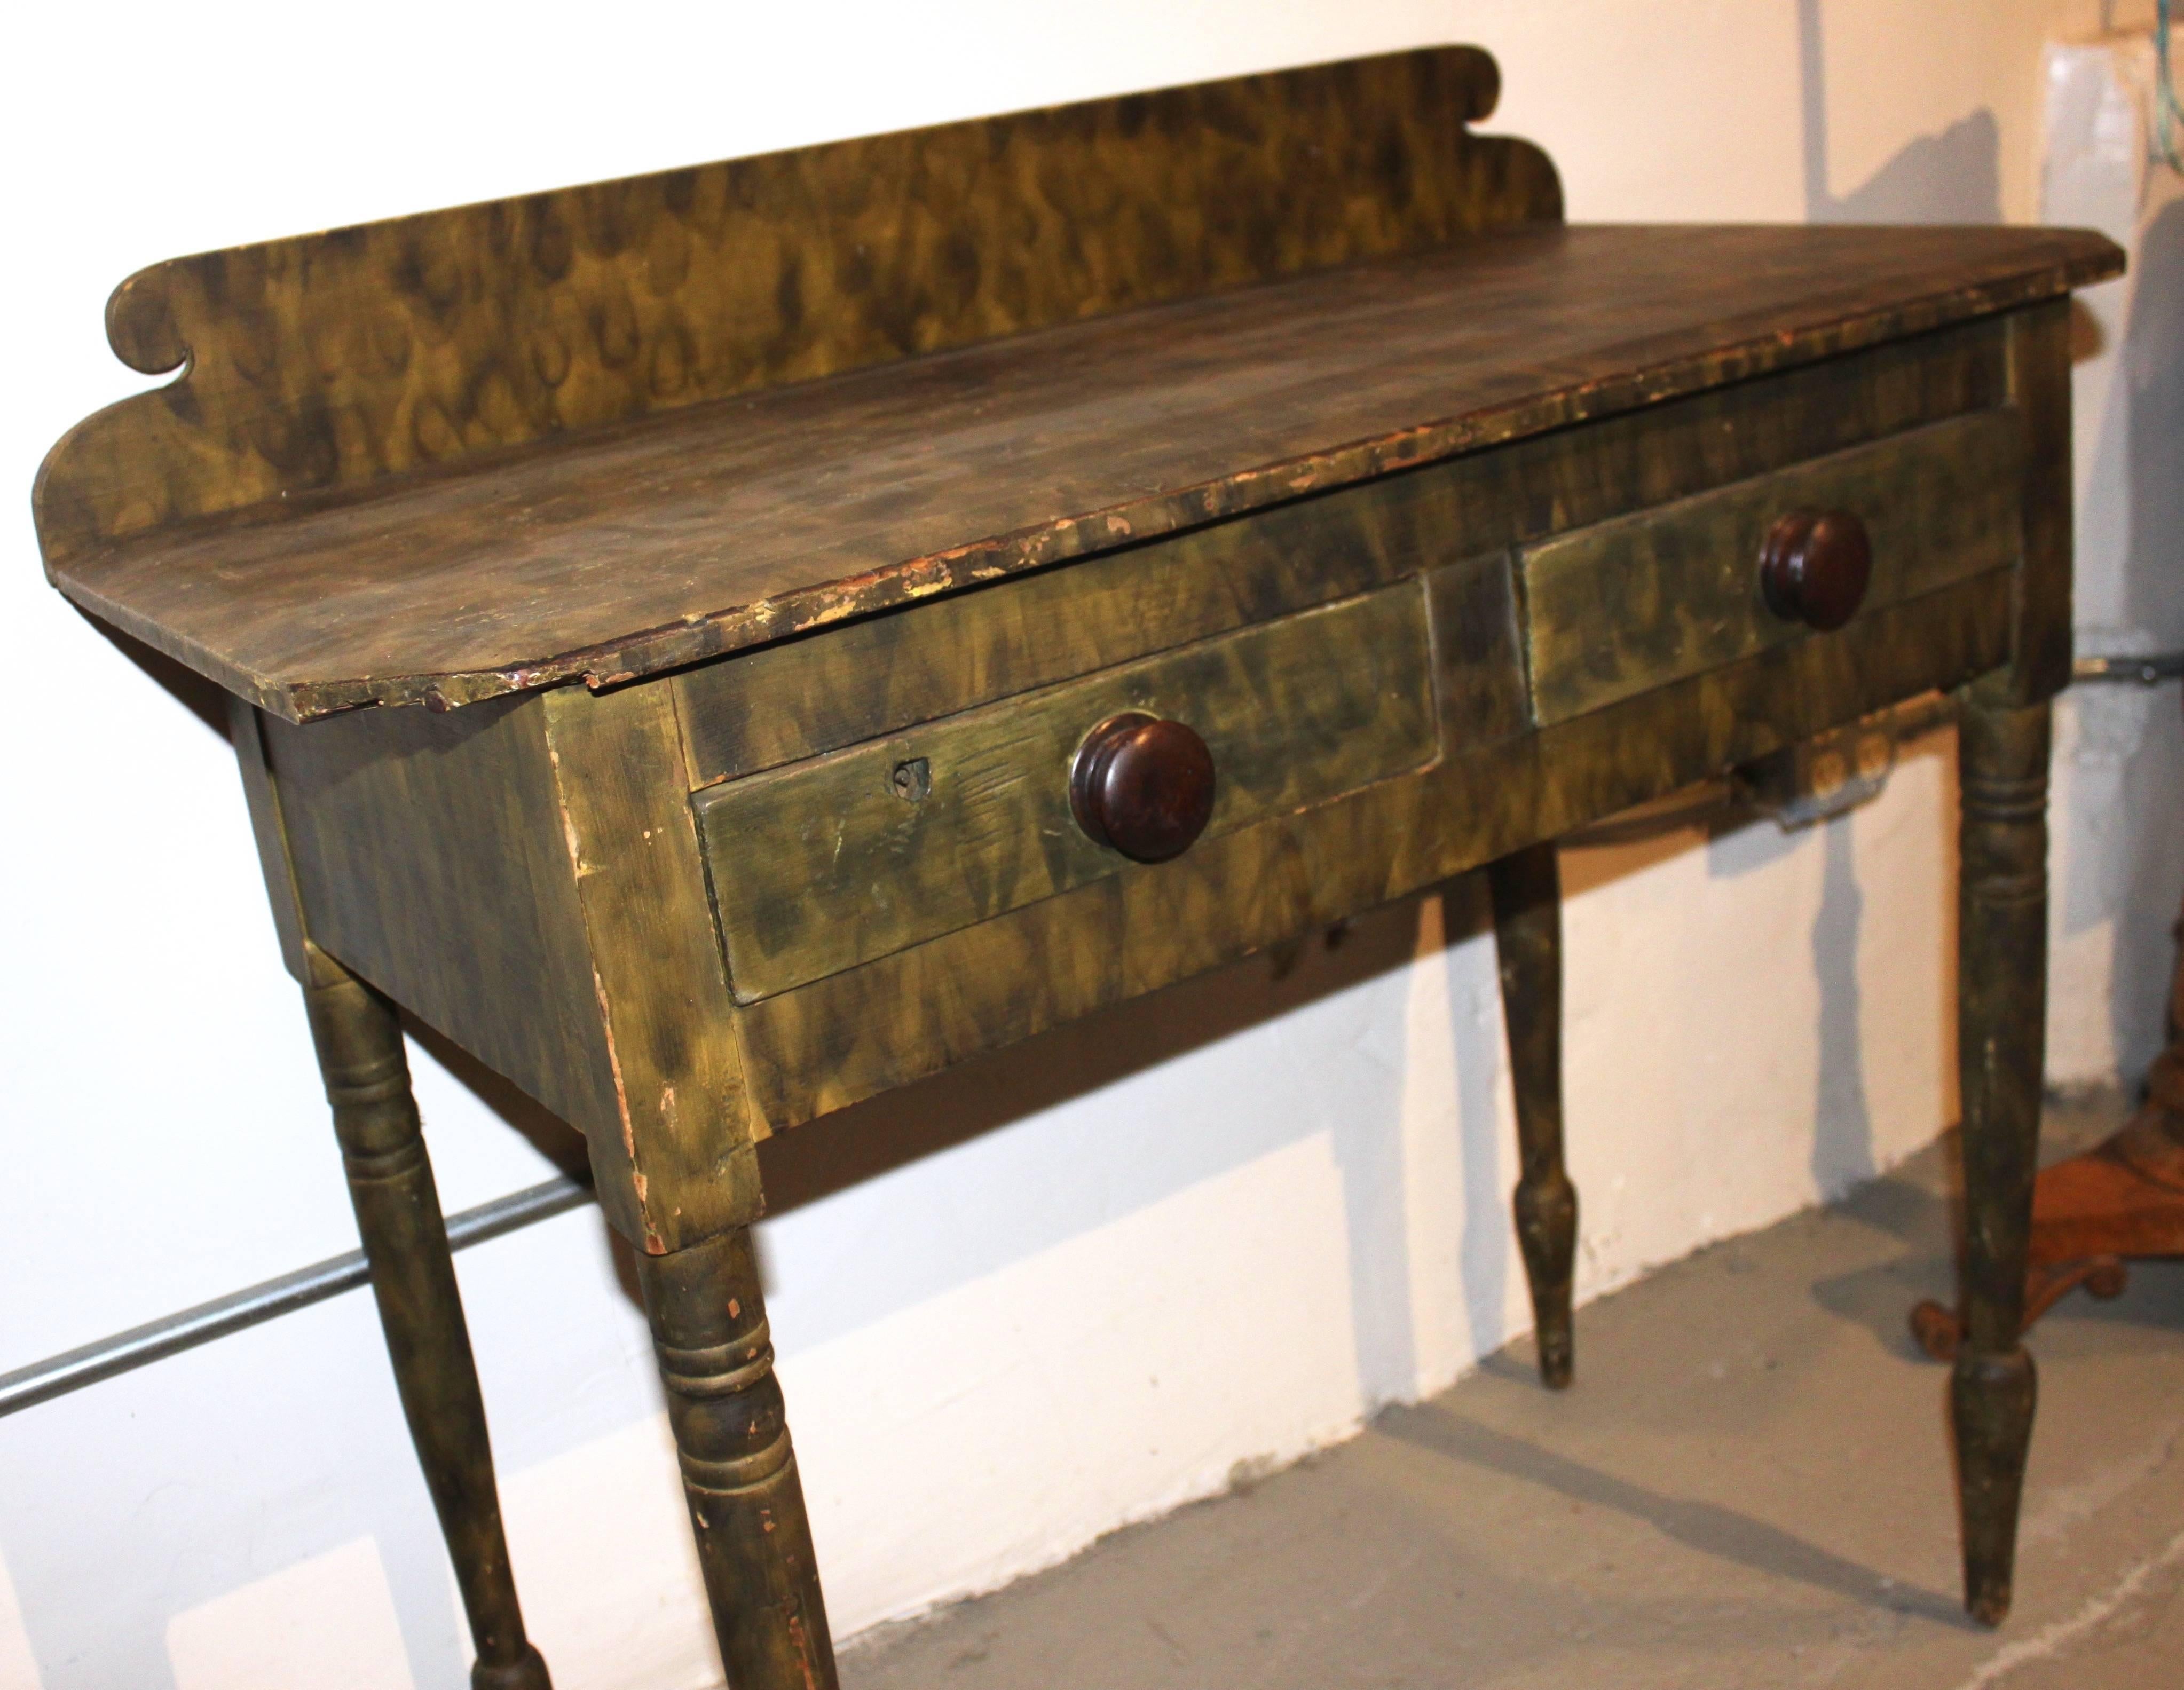 Minor imperfections and repairs. Painted table is American early 19th century which then is smoke decorated (using candle smoke) to give the streaking or graining effect.

Original paint.